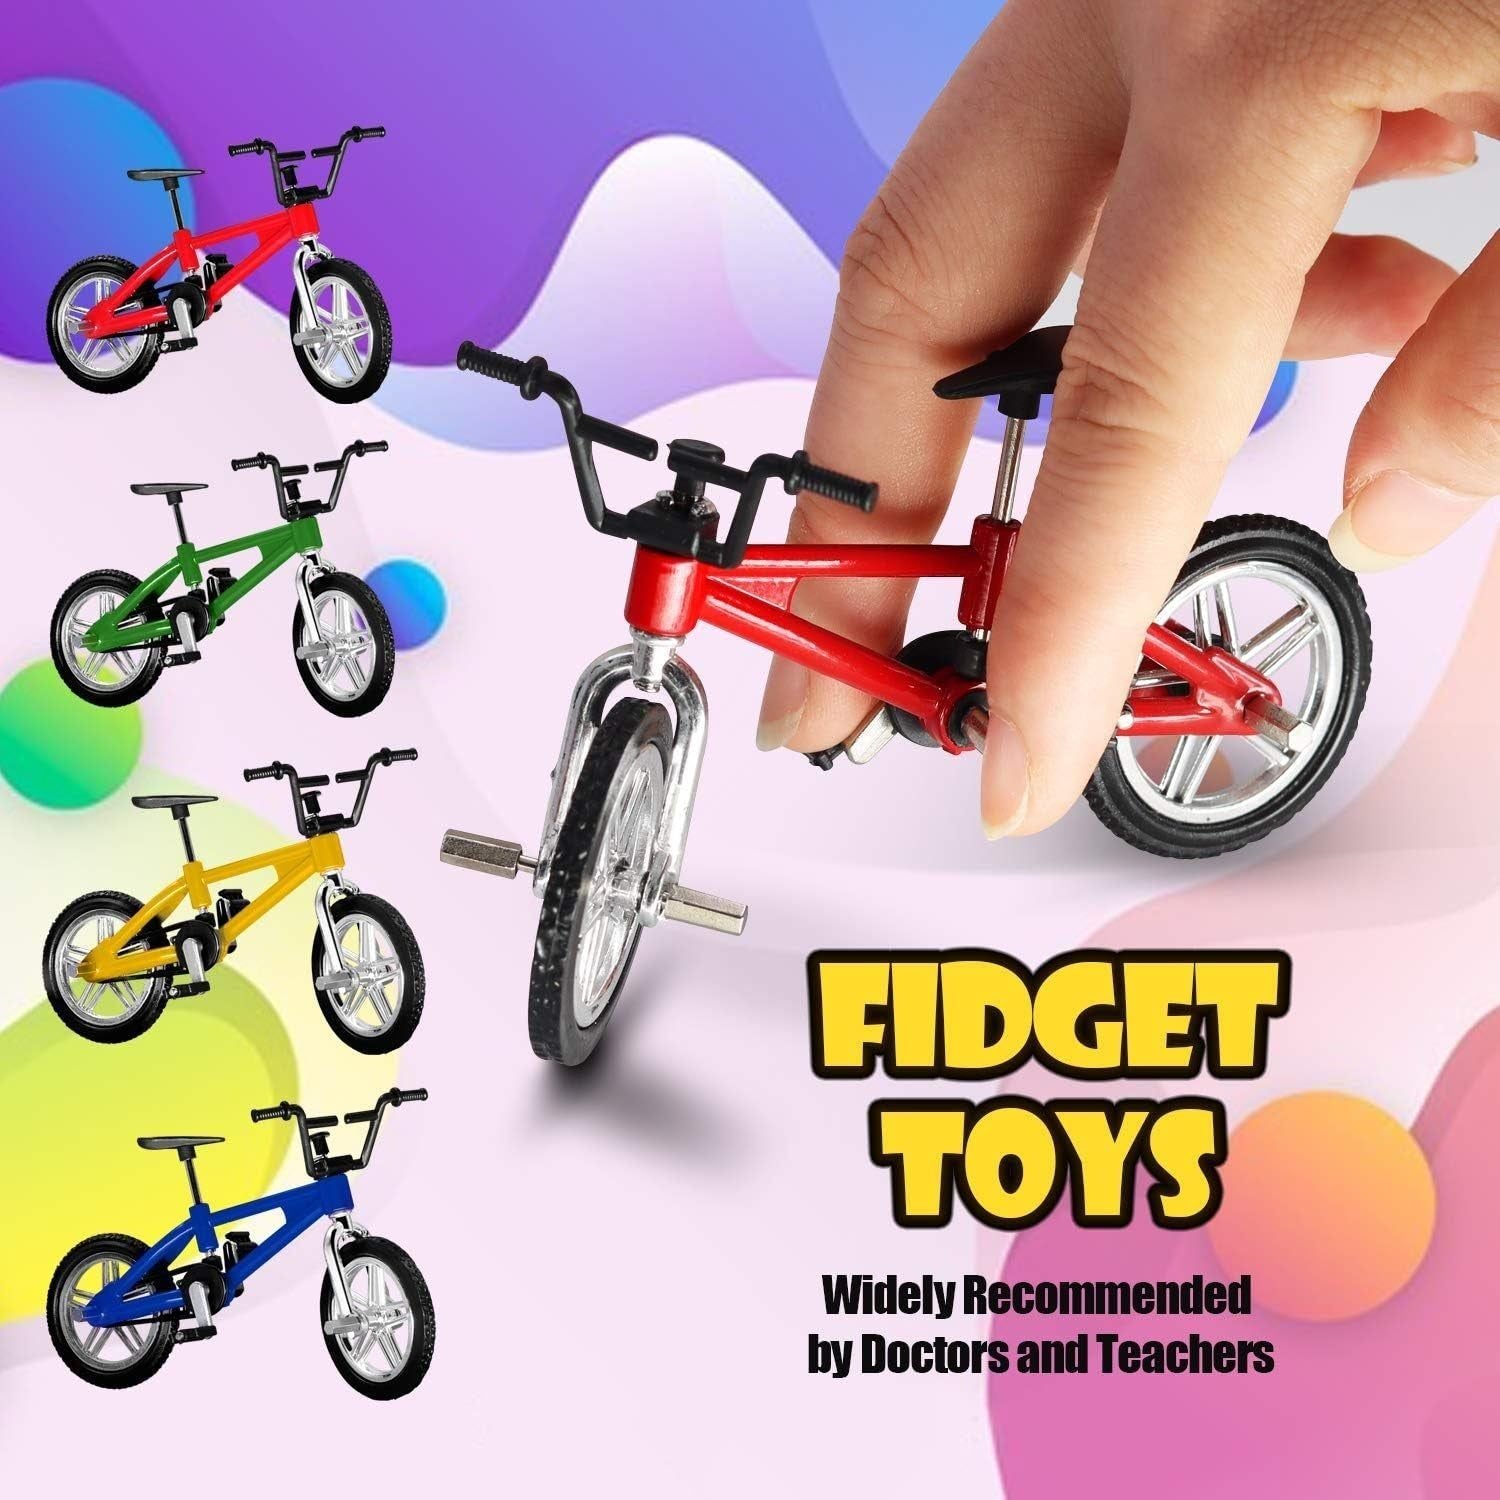 Mini Finger Bike - Miniature Fidget Bicycle Toy Game Set for Kids and Adults - Metal Bike Model Collections Decoration - 4 Colors (4 Pack)